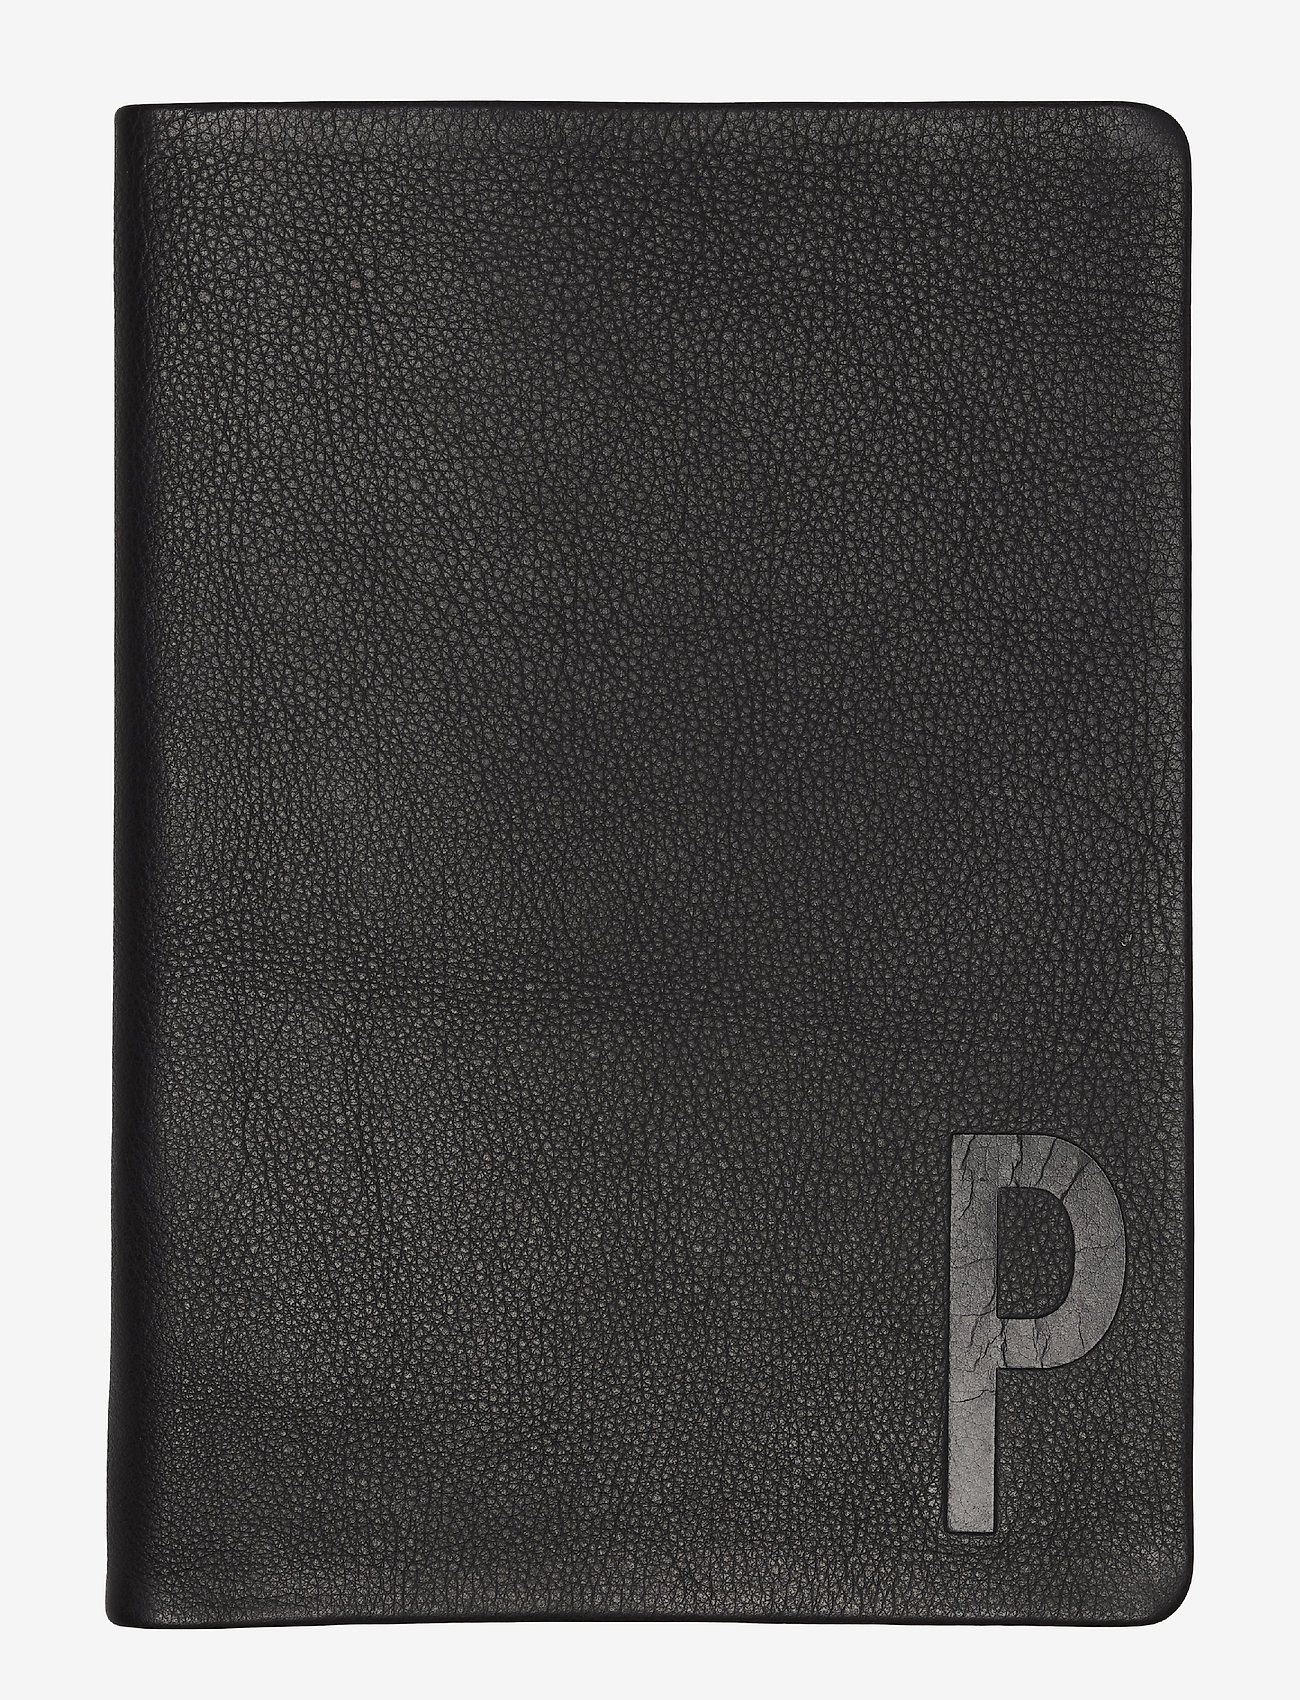 Design Letters - SUIT UP - Personal Notebook - home - black - 0